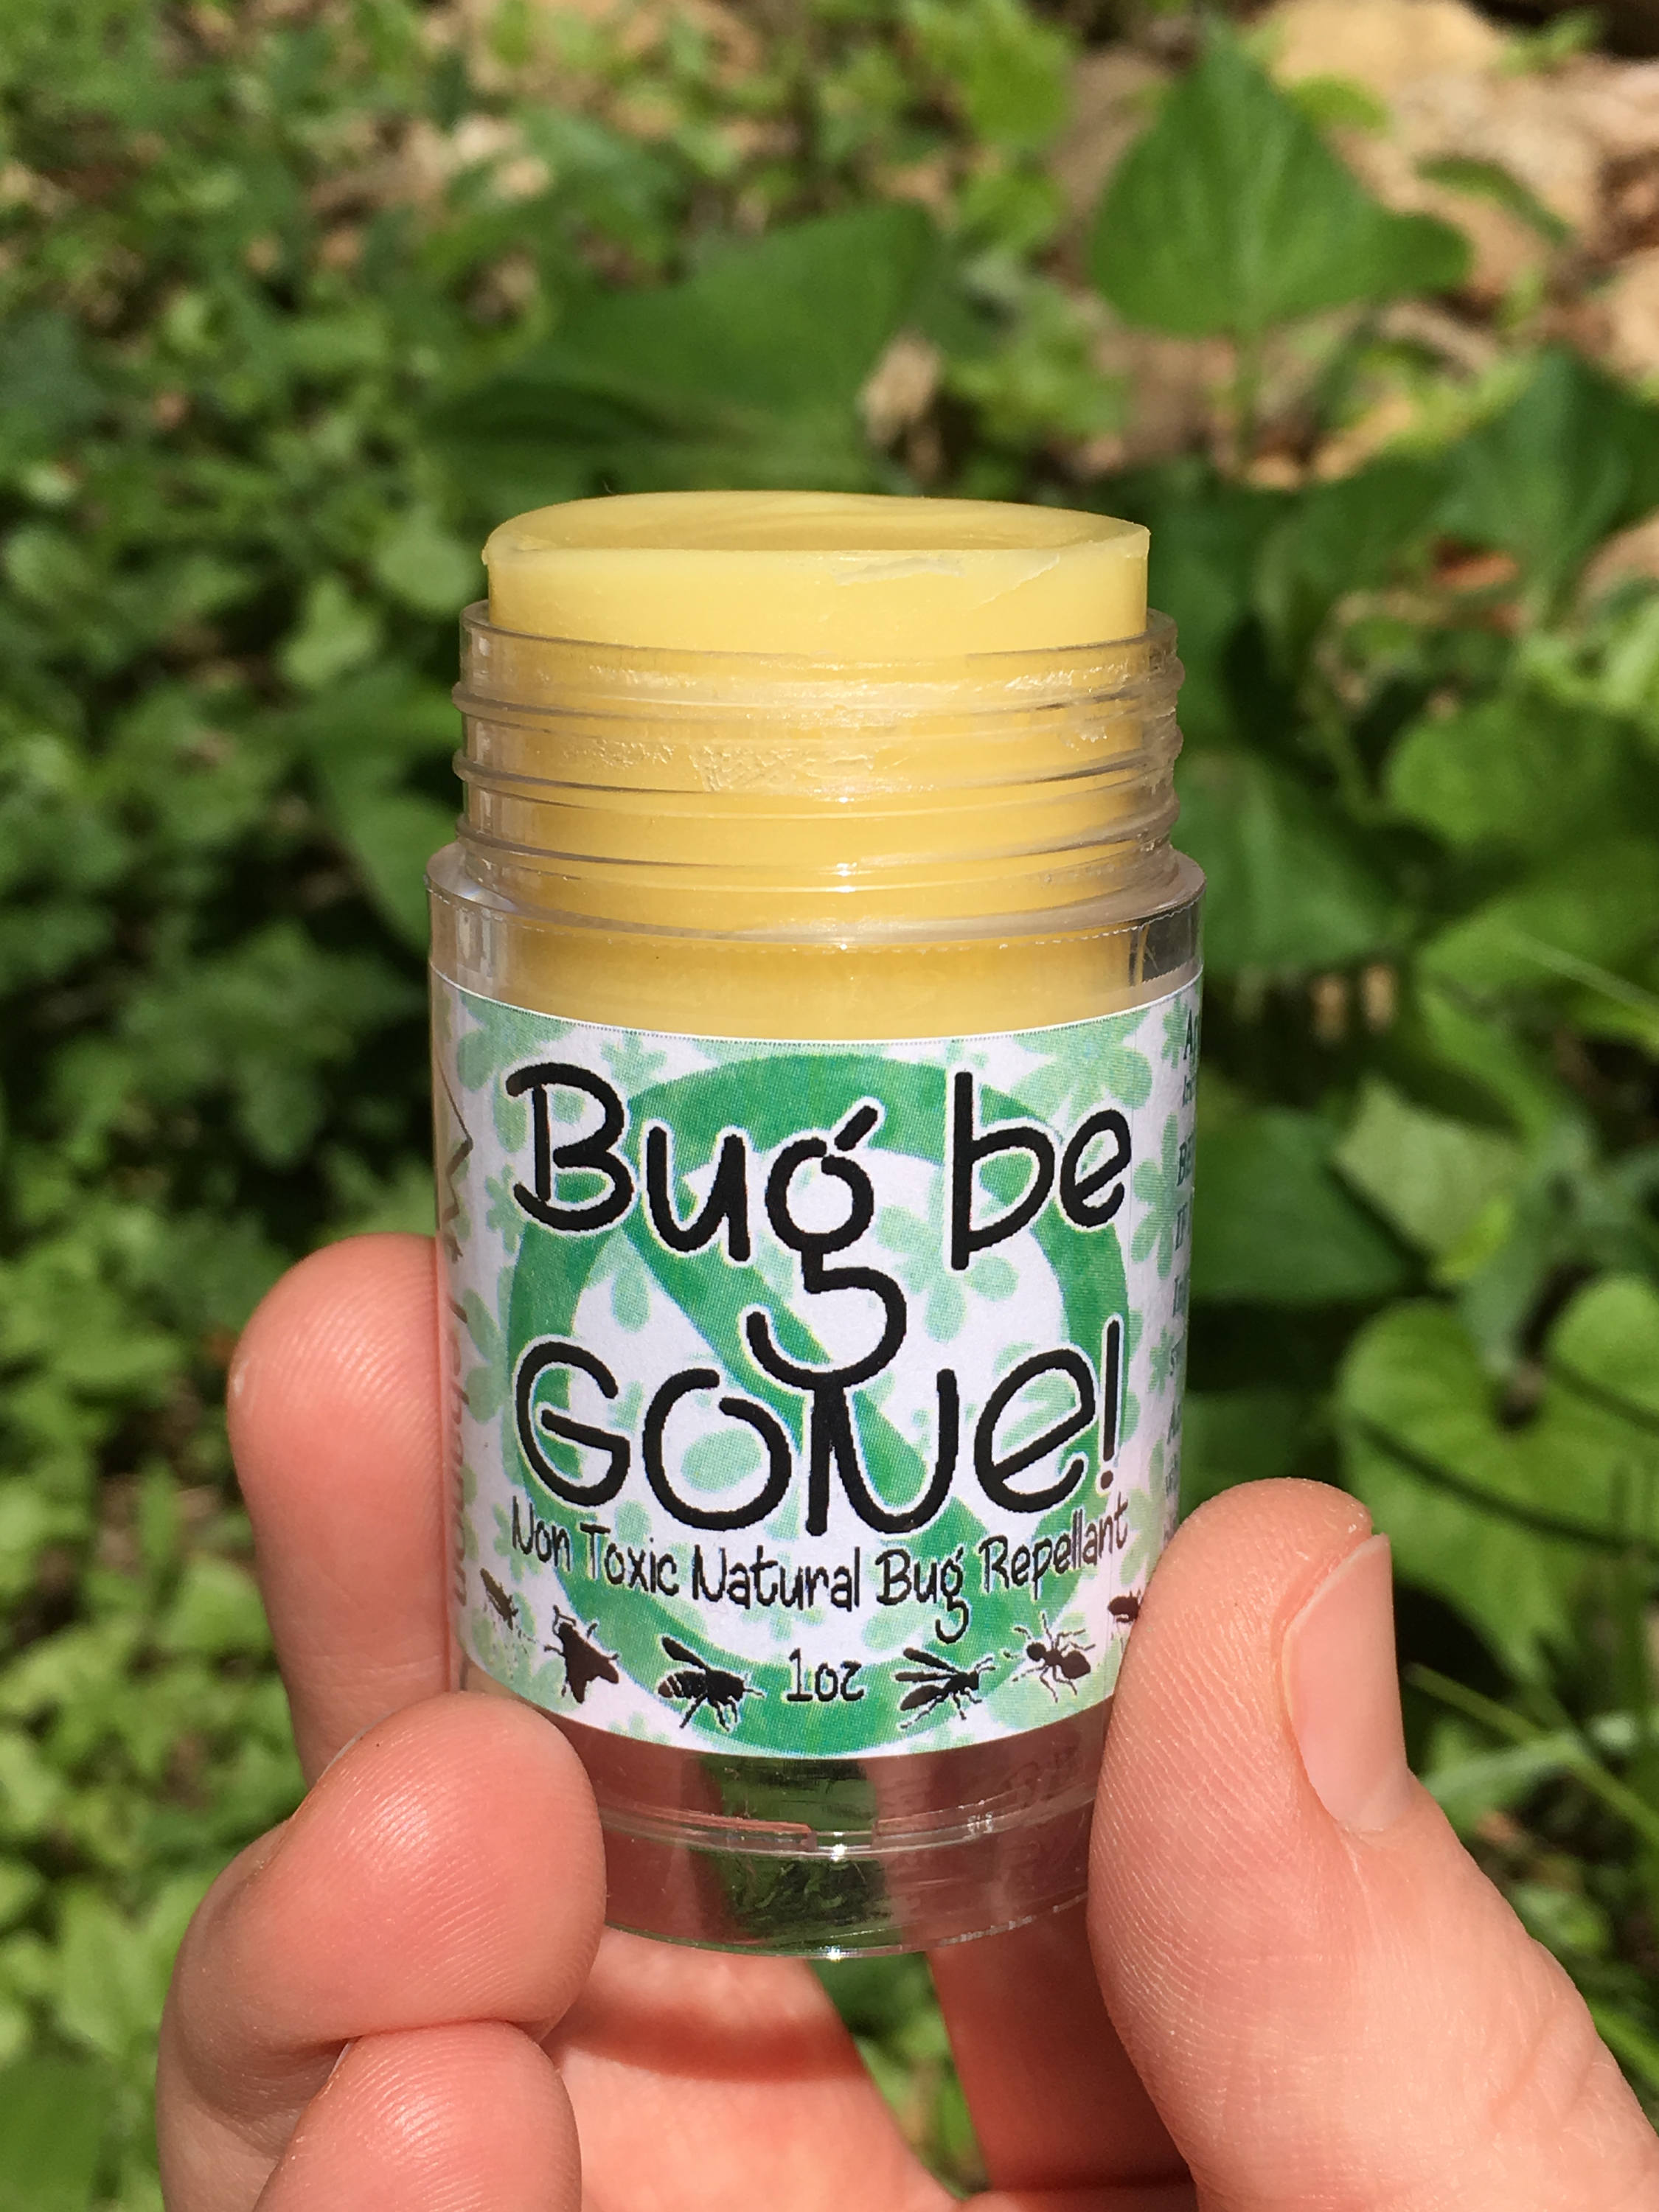 Bug Be Gone -insect repellant - Deet Free - Safe for Children Bug Repellant